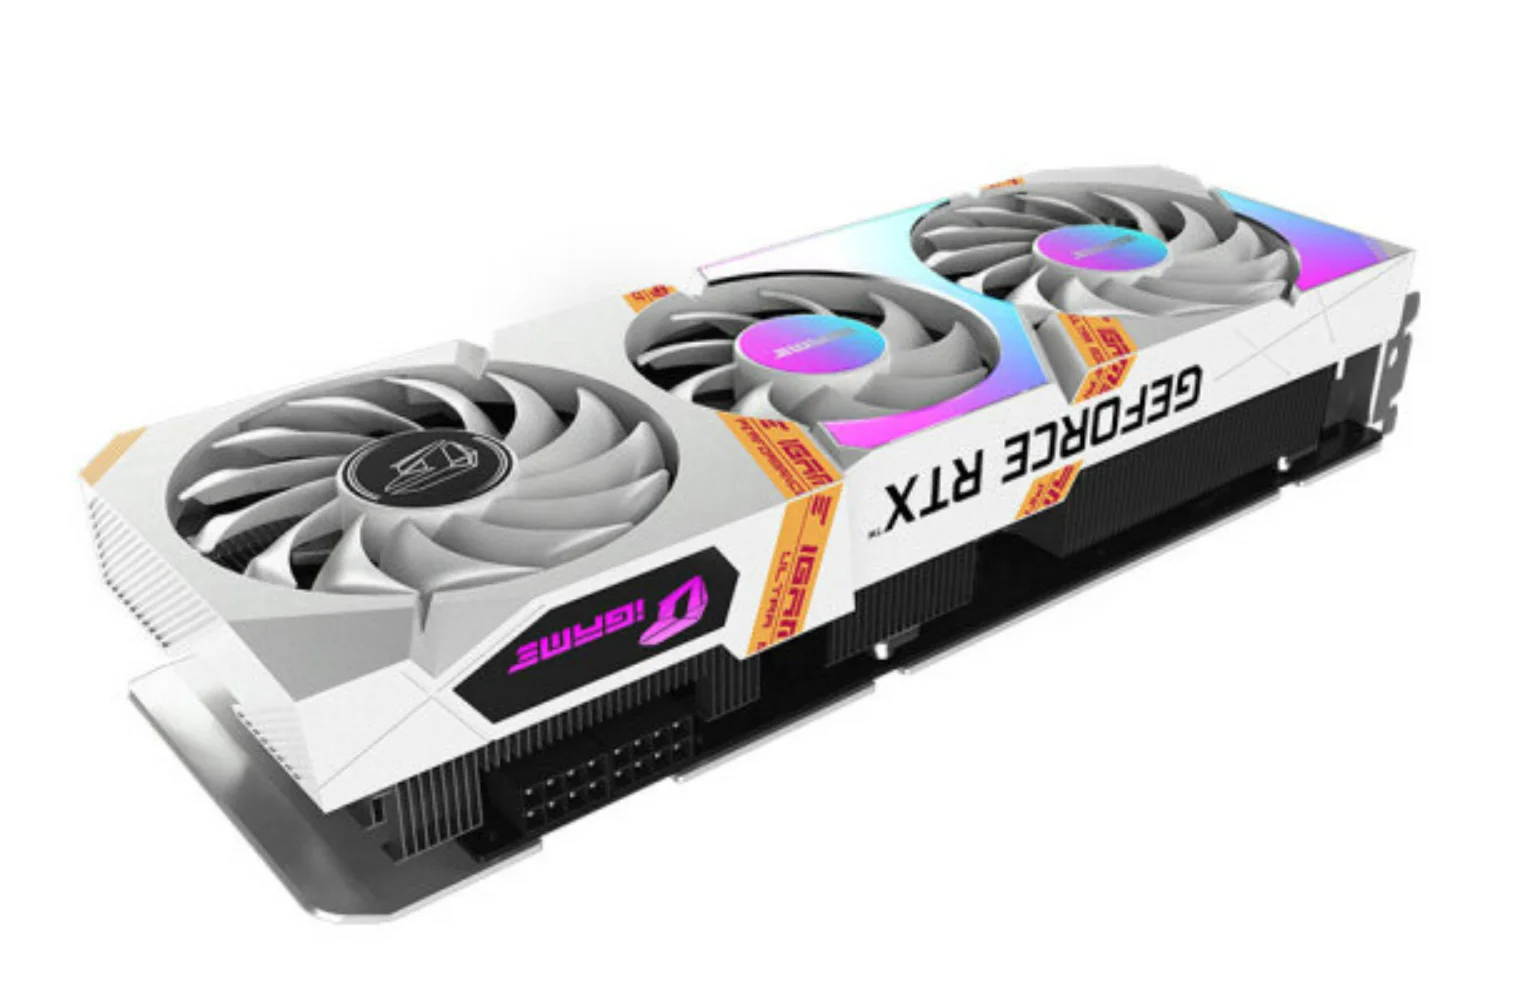 Colorful ultra duo 4060. Colorful RTX 3060 12gb. Colorful IGAME GEFORCE RTX 3060 ti Ultra w OC. Colorful GEFORCE RTX 3060 12 ГБ (IGAME GEFORCE RTX 3060 Ultra w OC 12g l-v), LHR. RTX 3060 12gb colorful IGAME.